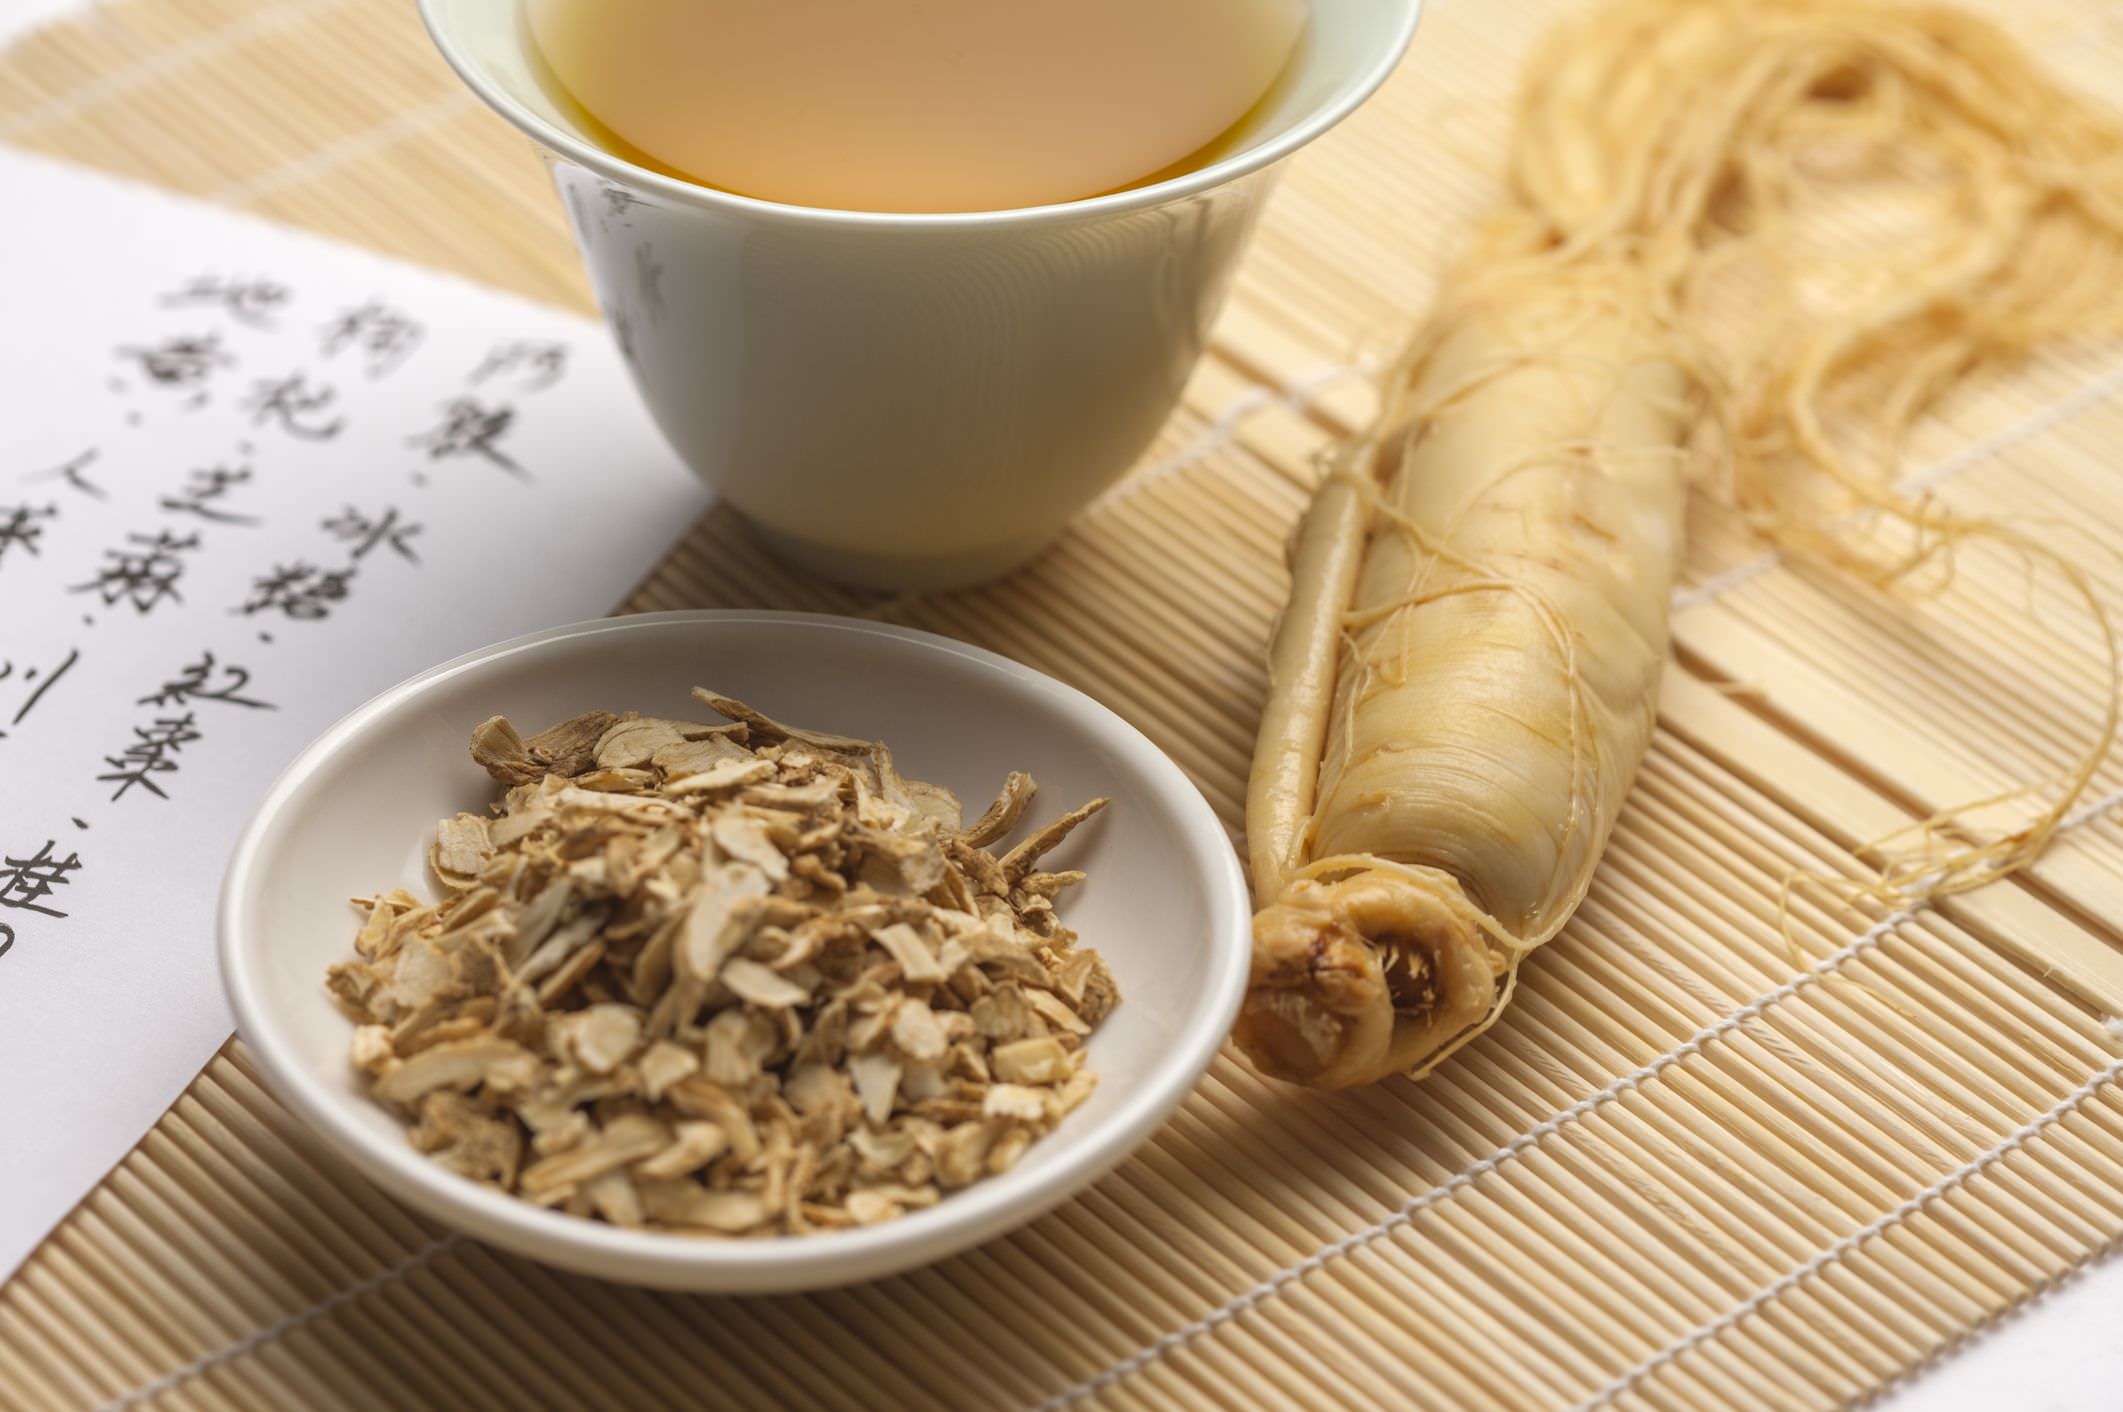 how to incorporate ginseng into diet